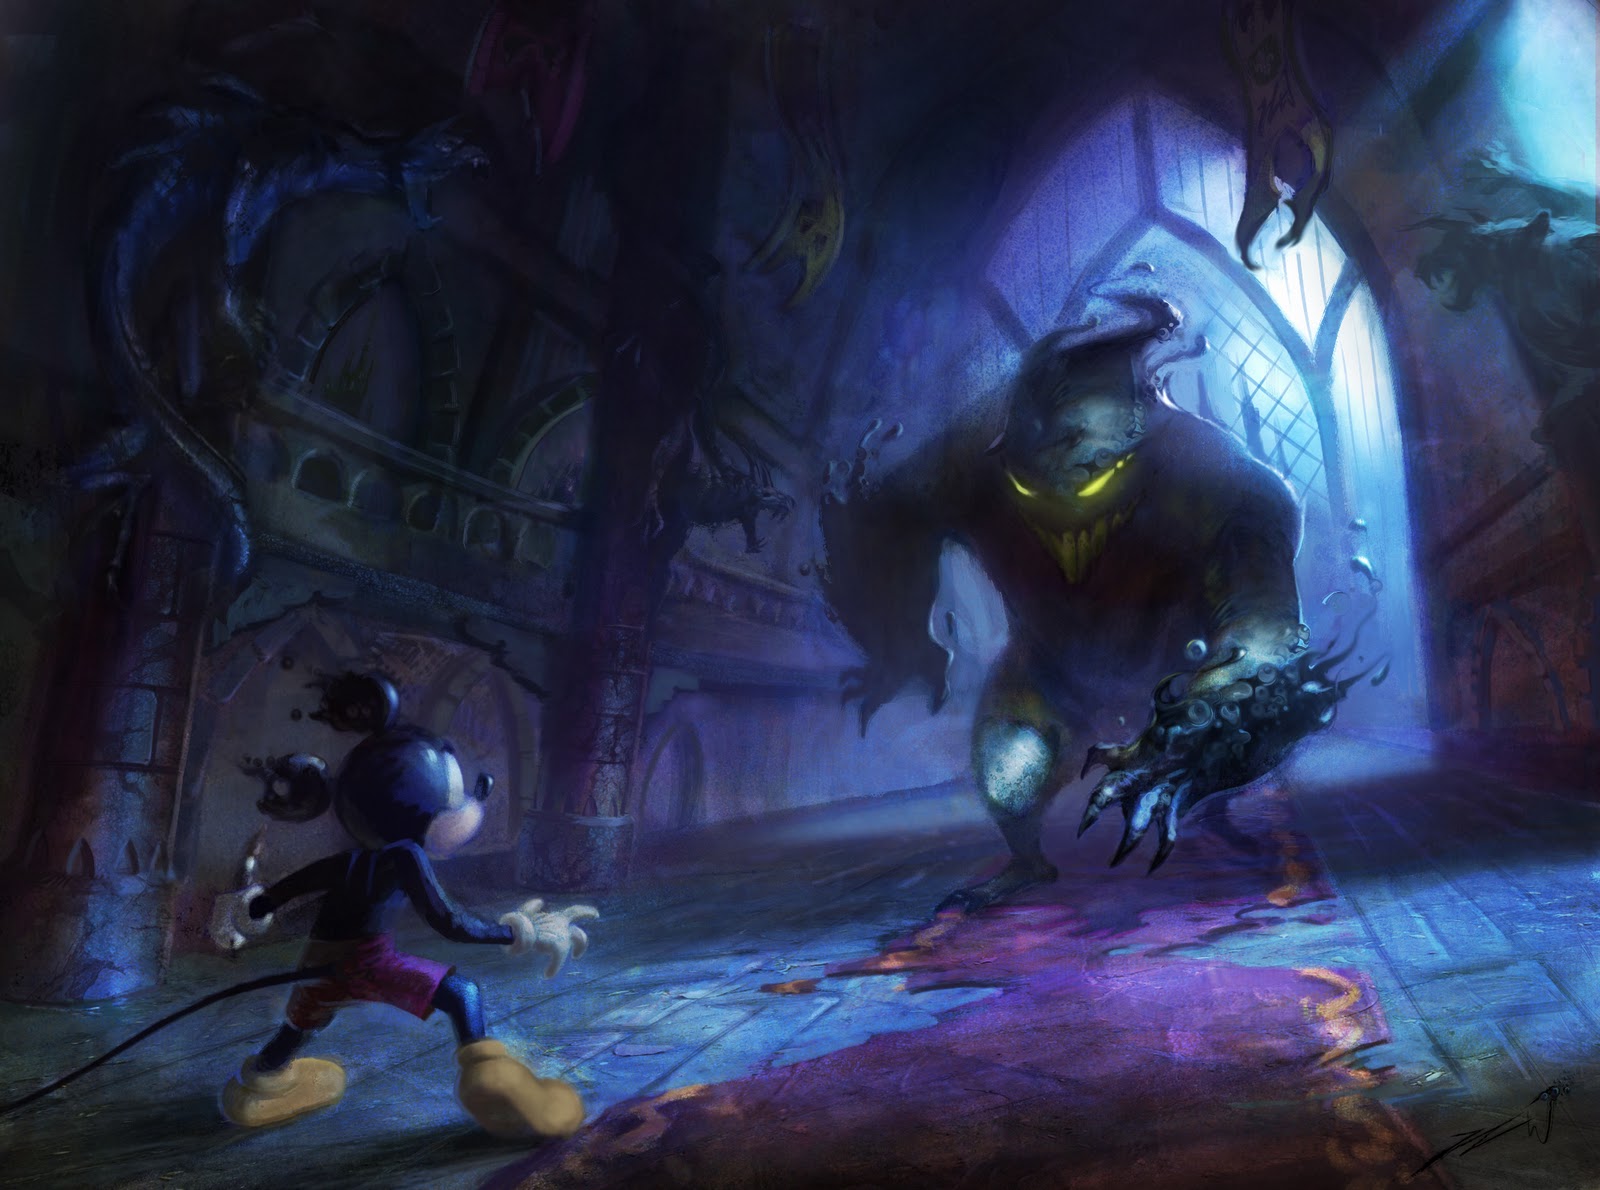 which epic mickey character are you